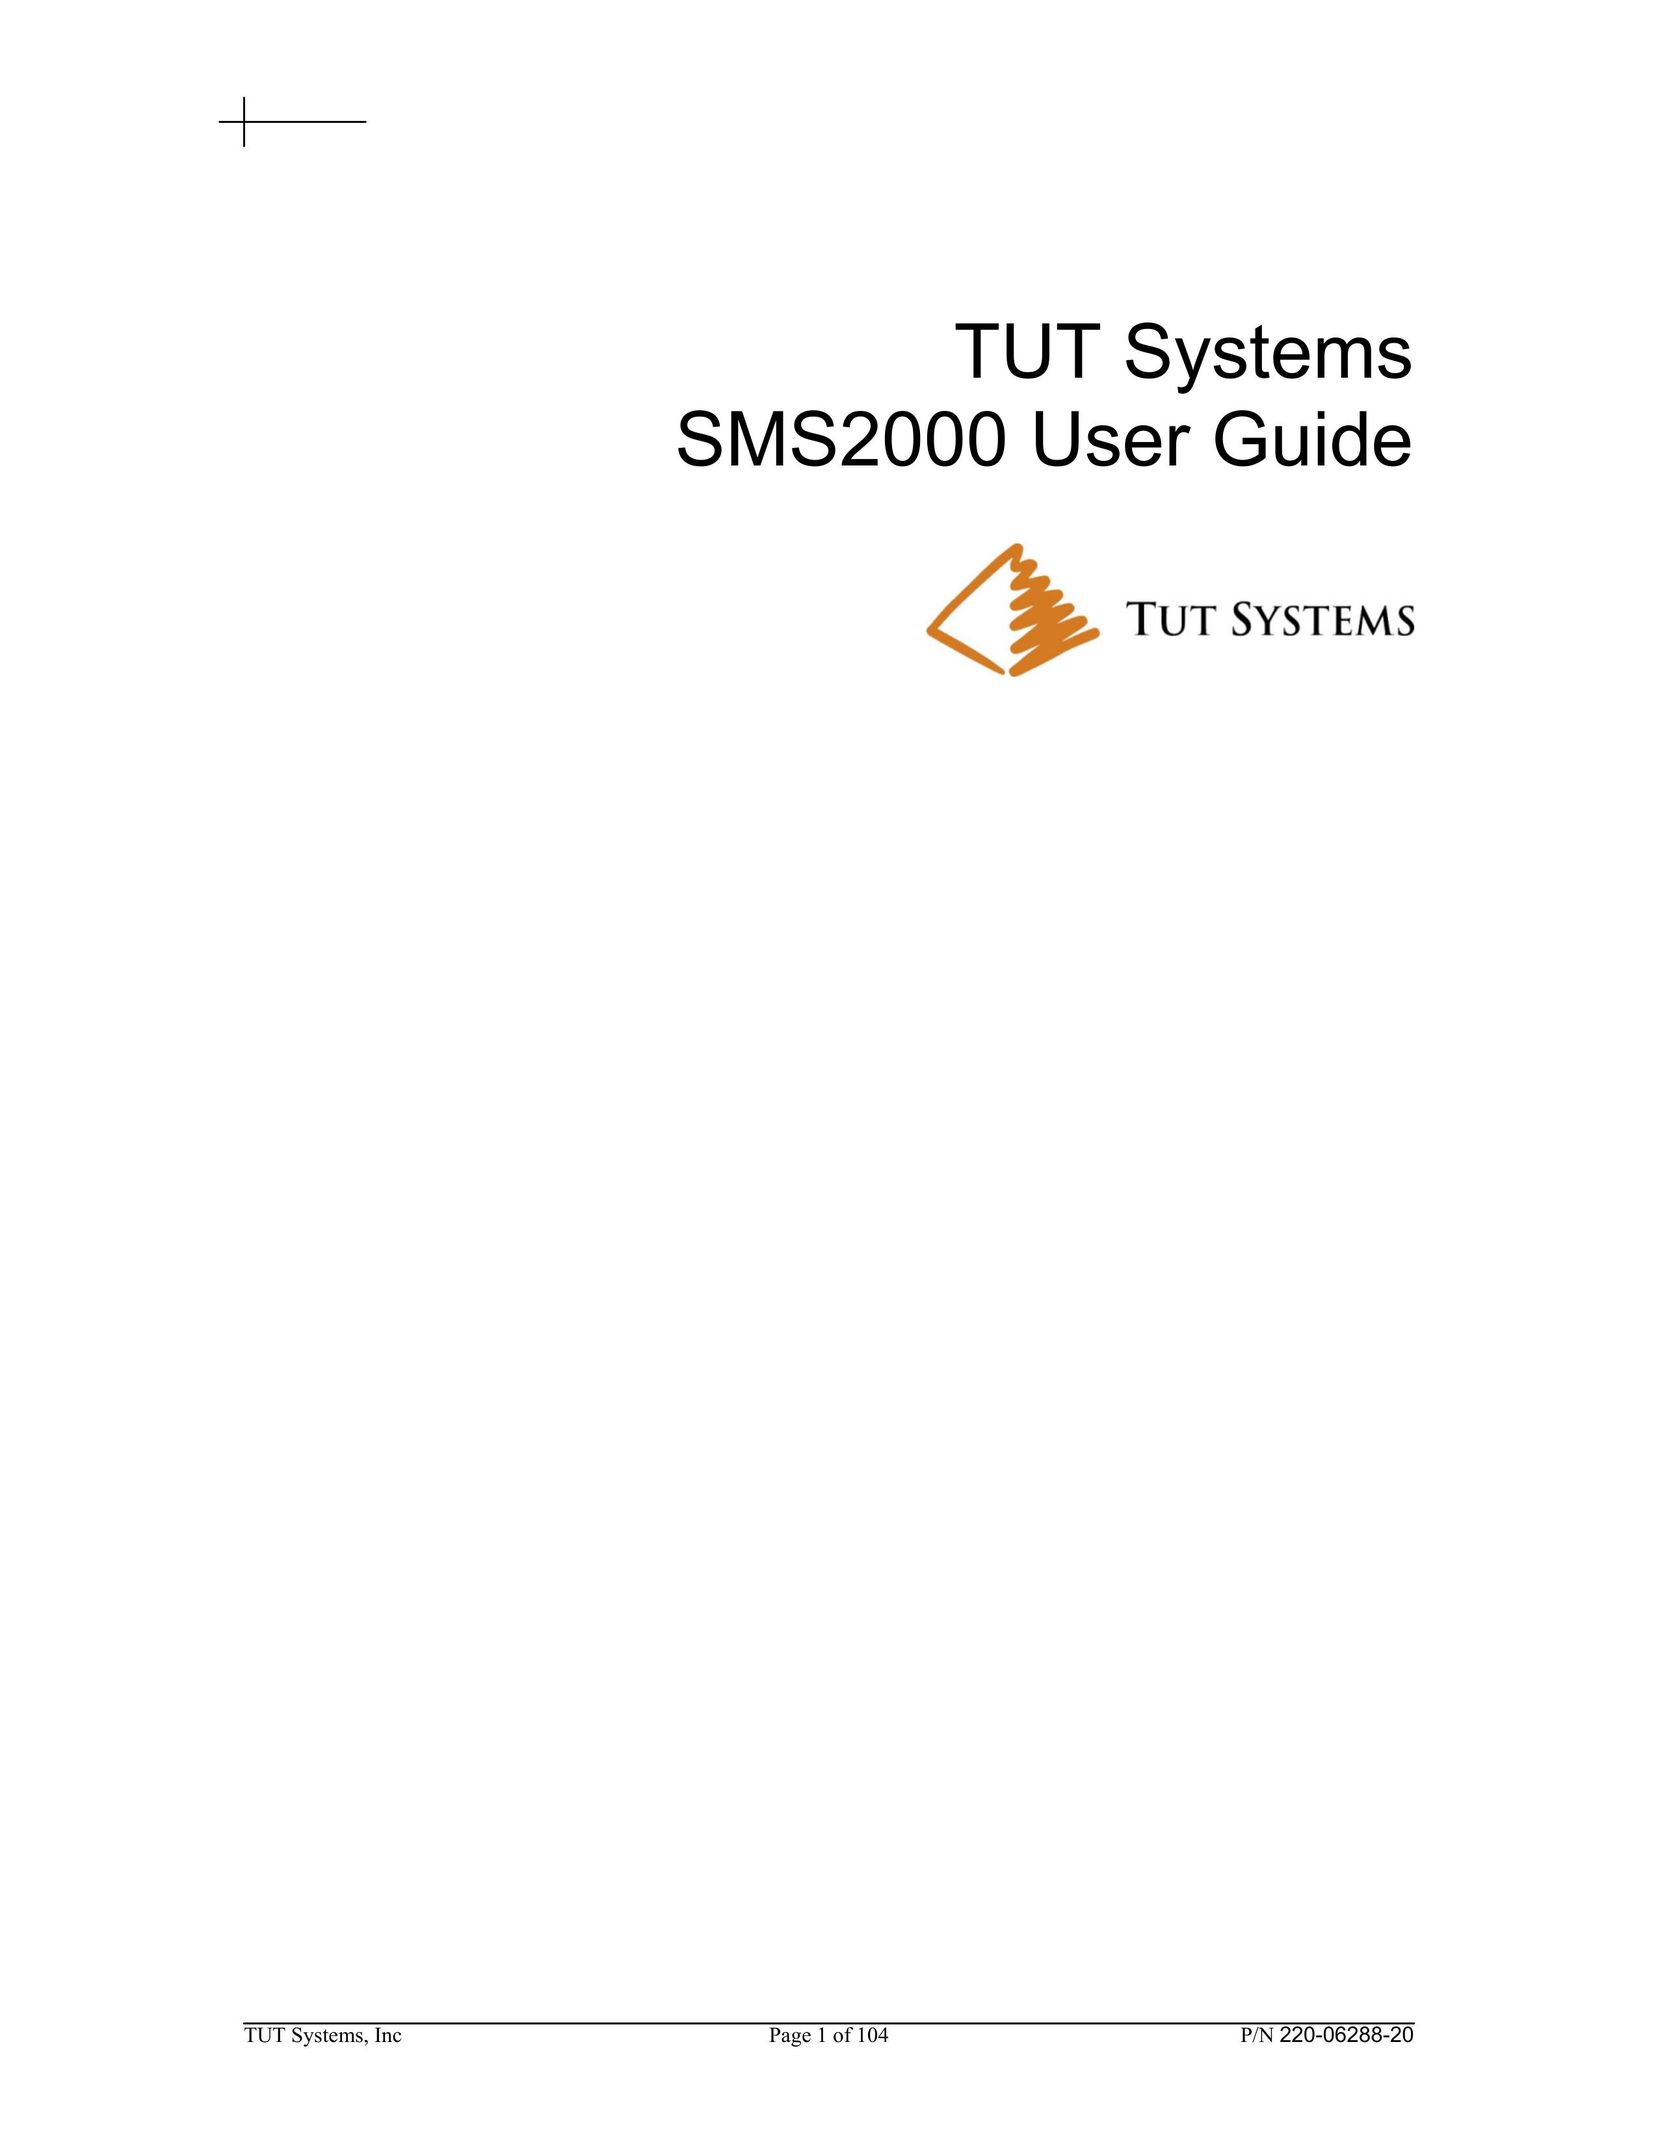 Tut Systems SMS2000 Switch User Manual